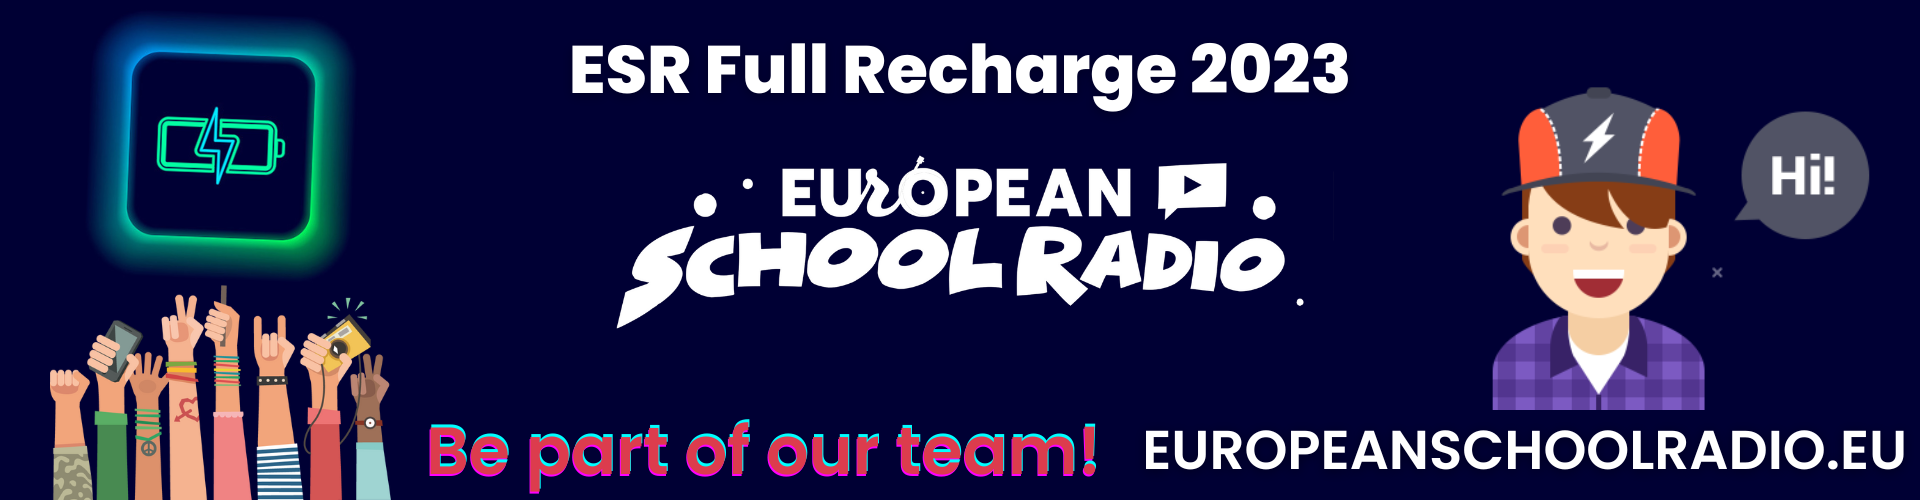 ESR Full Recharge Be part of our team